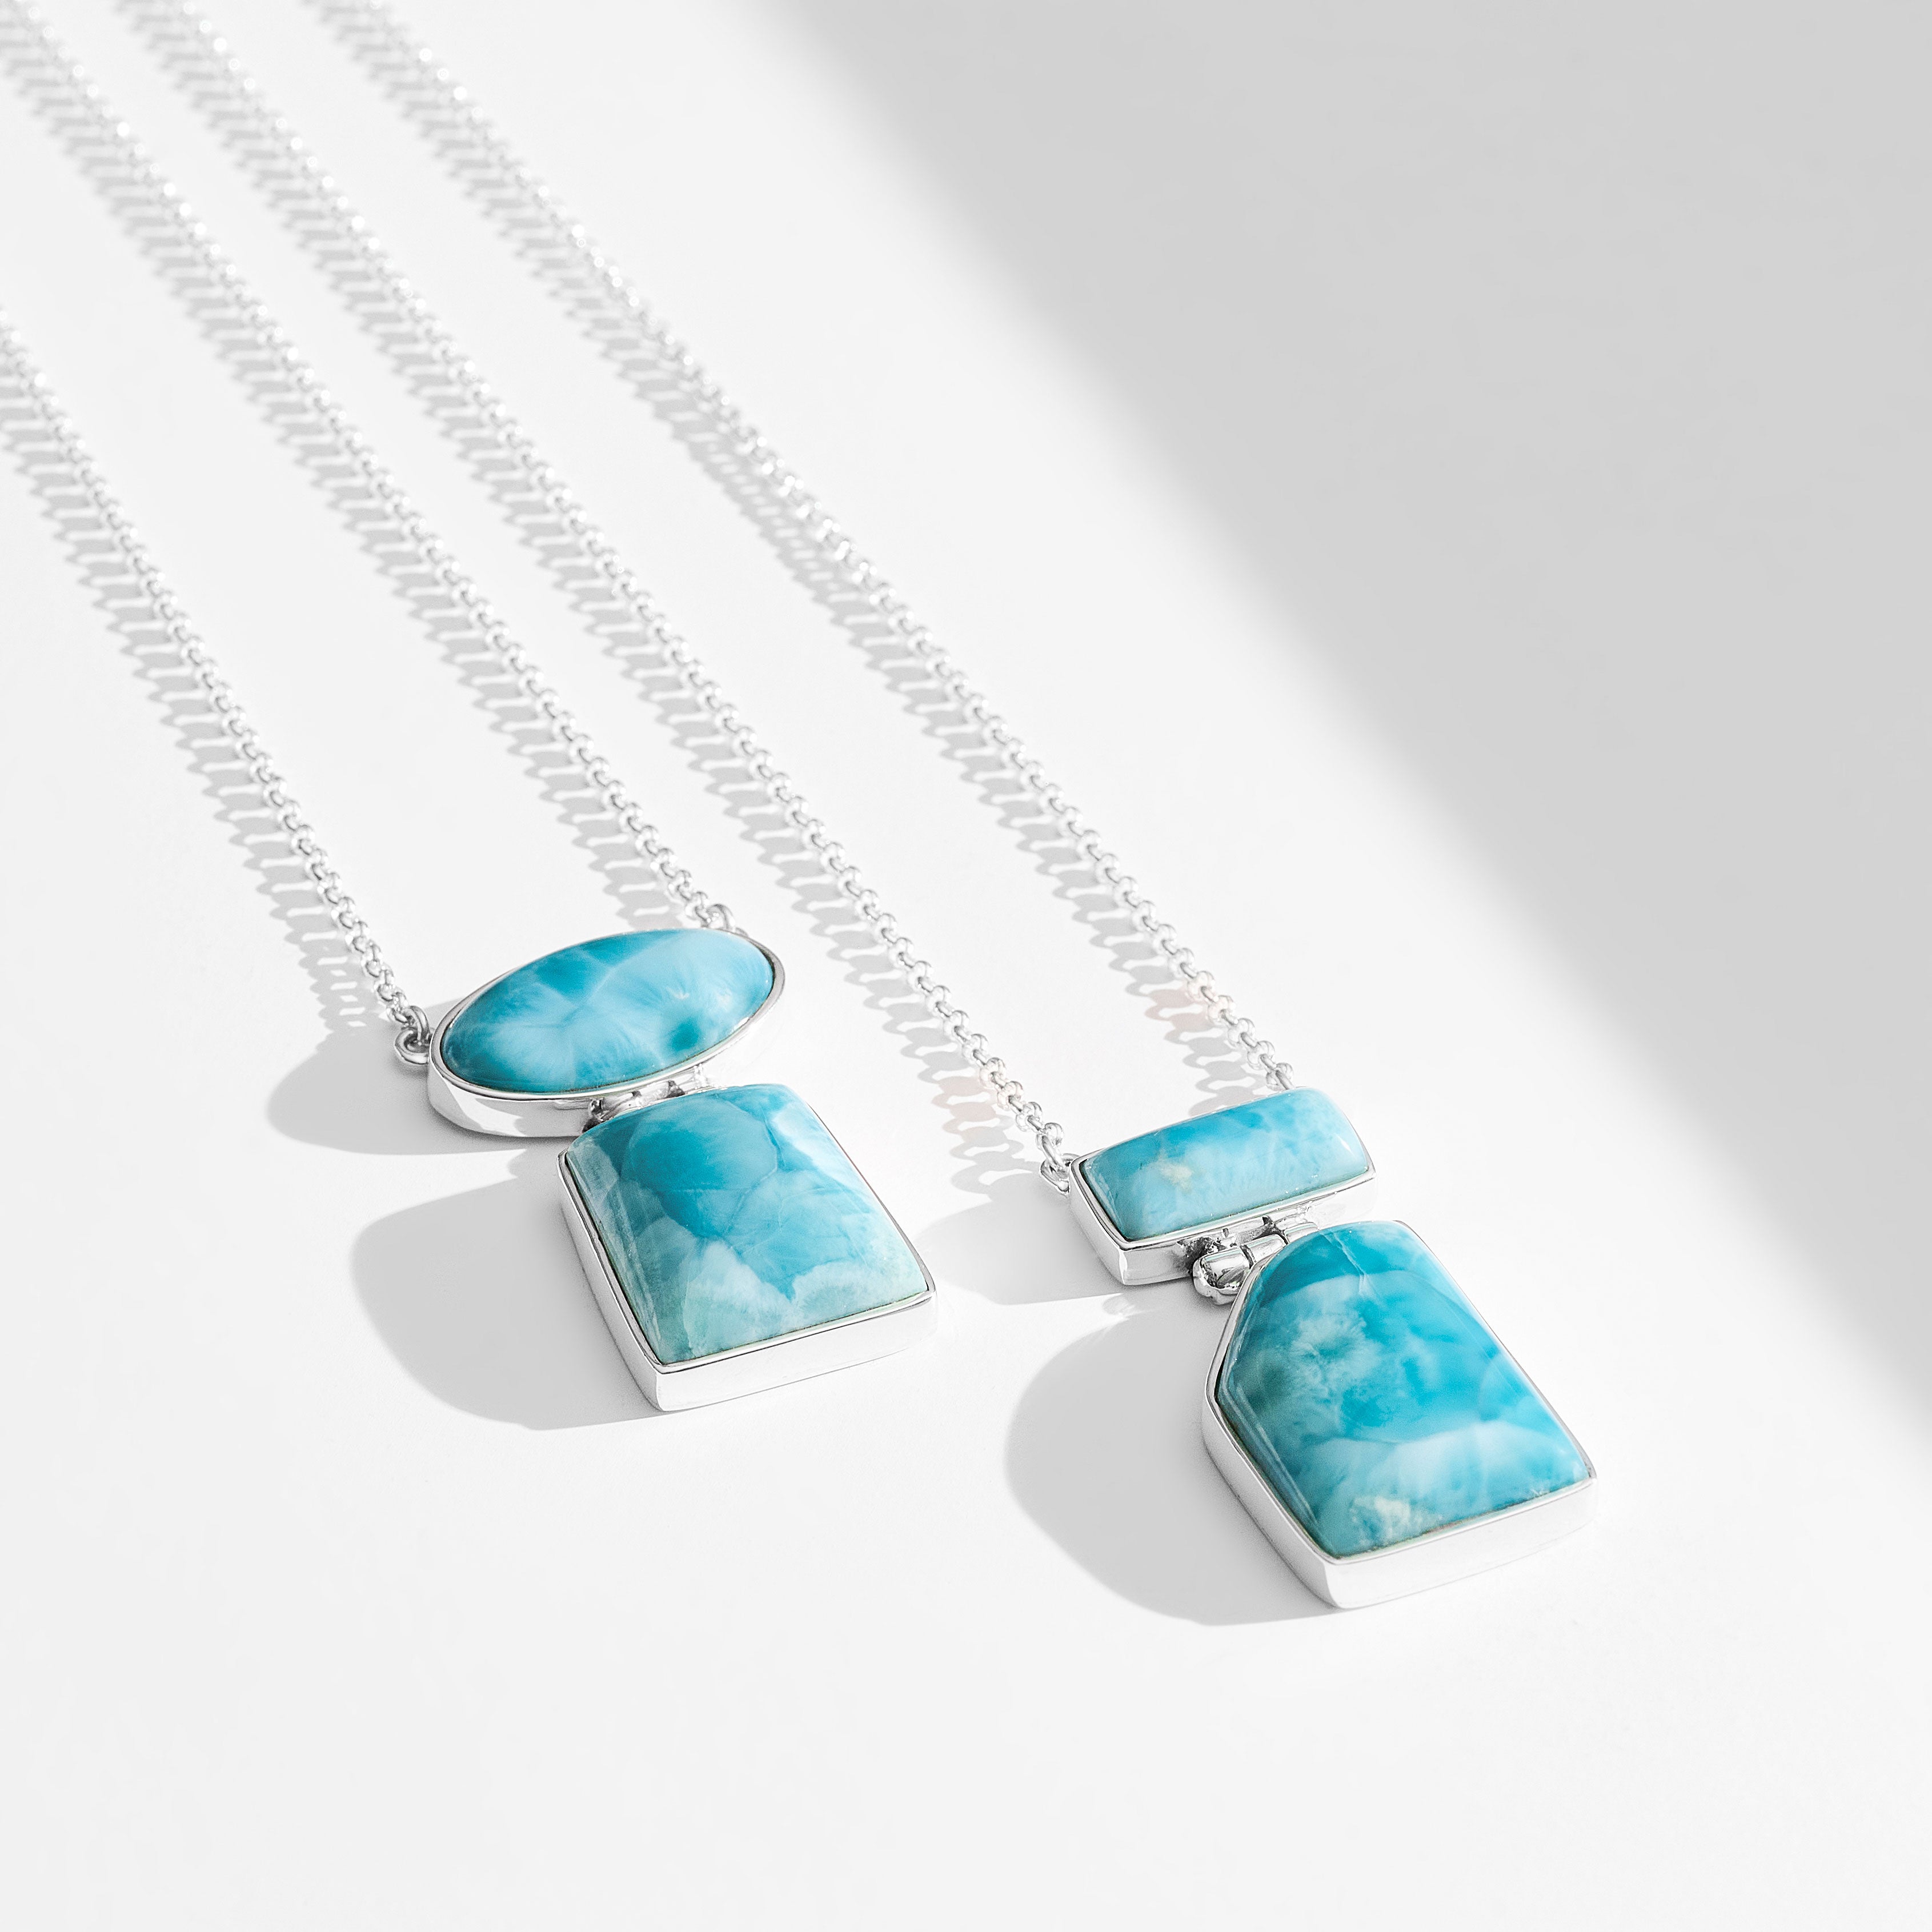 Shop real larimar stone necklaces for the one that is like a mother to you.